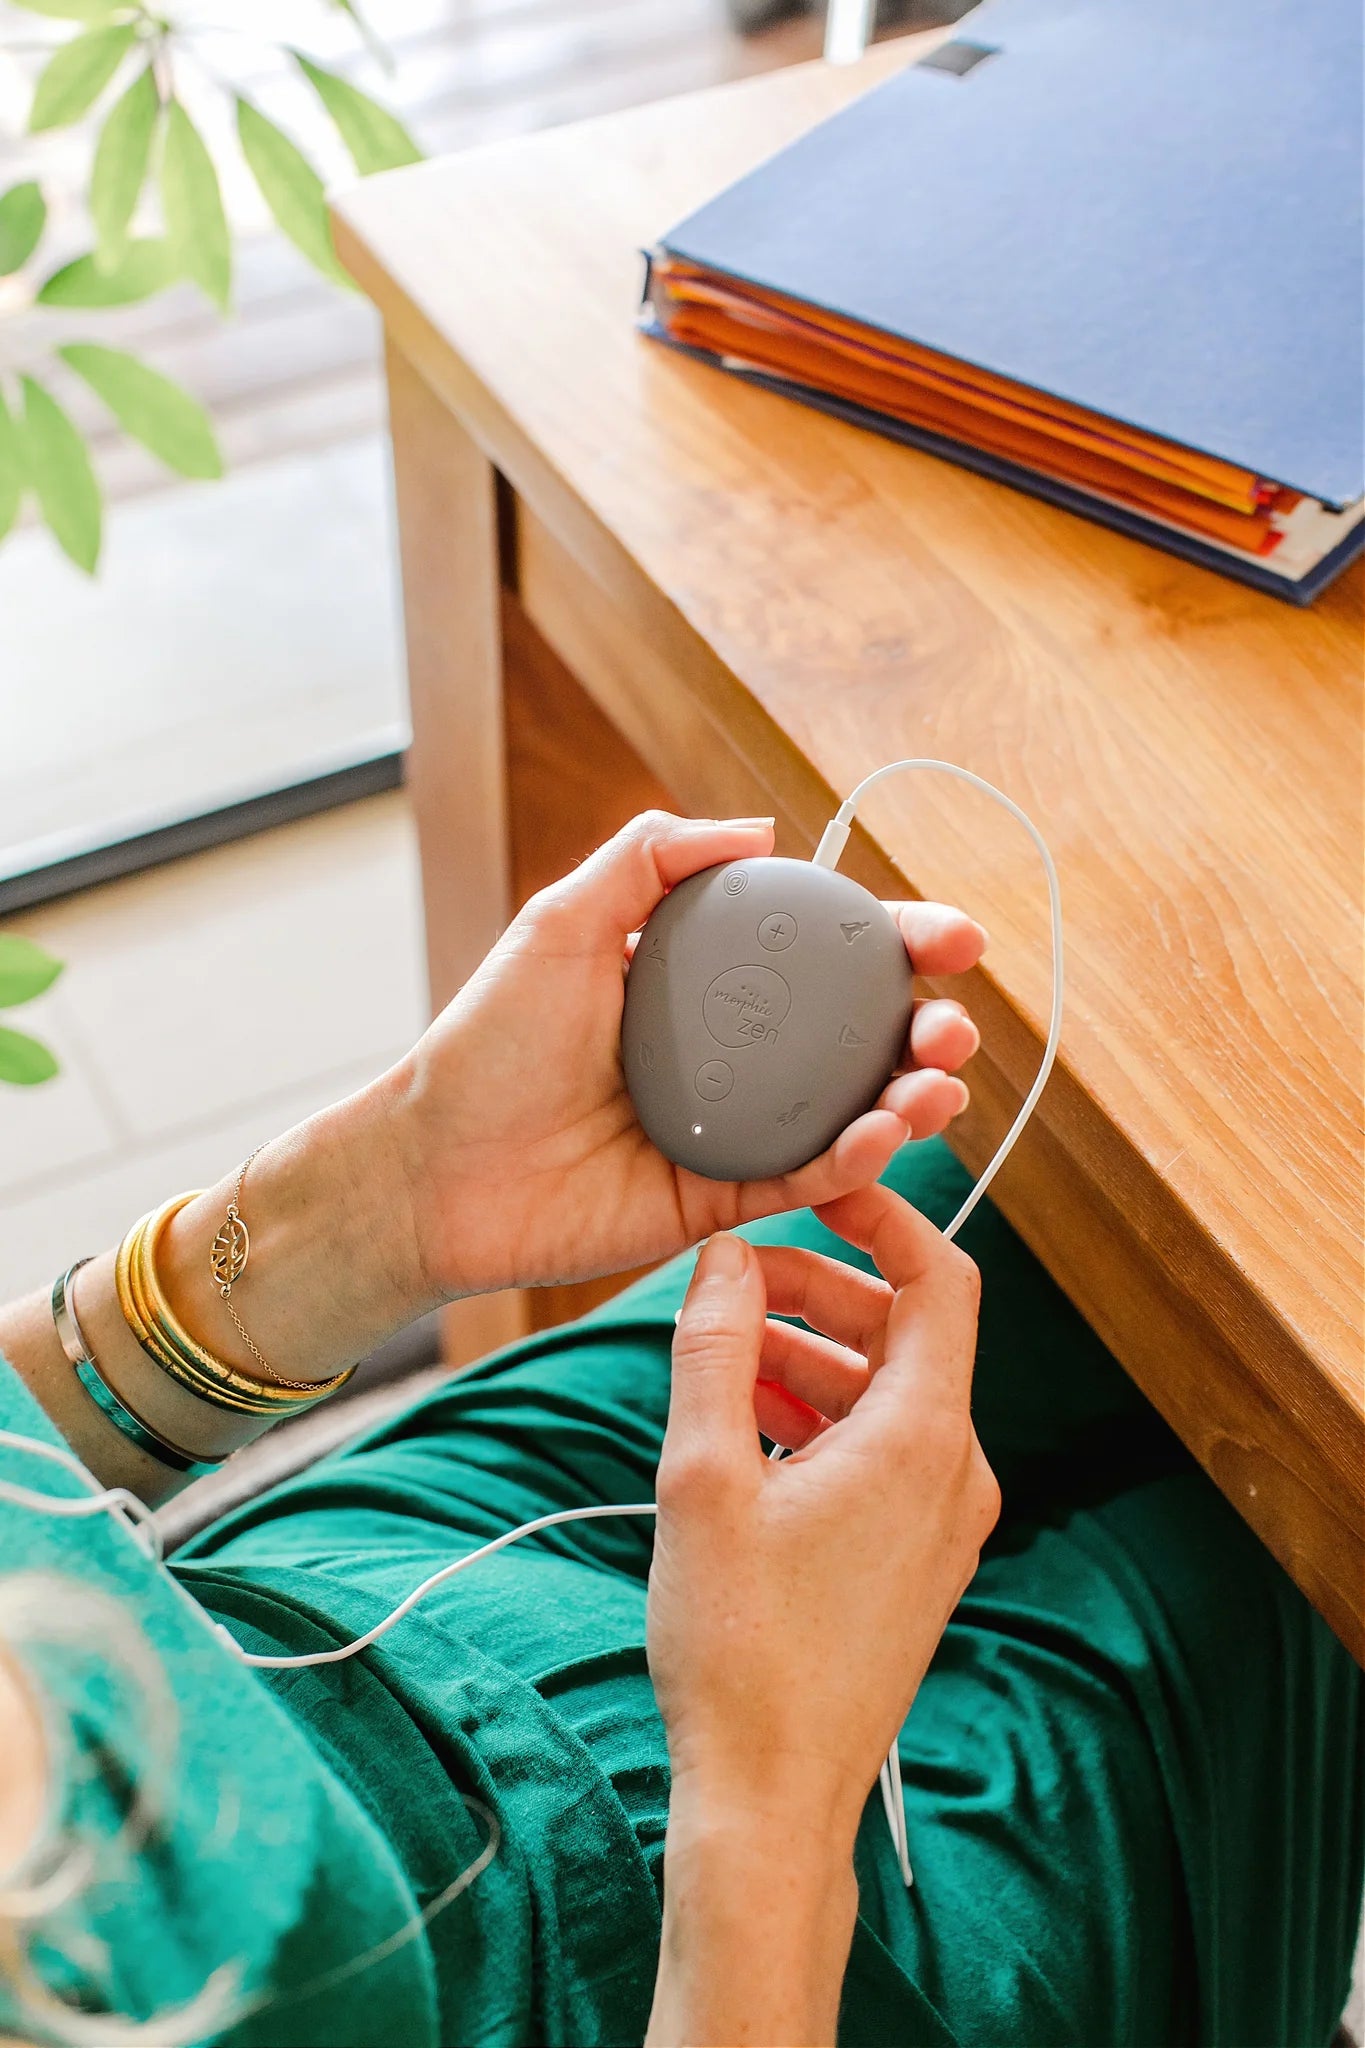 Morphée Zen - Compact and portable adults and older kids meditation aid device